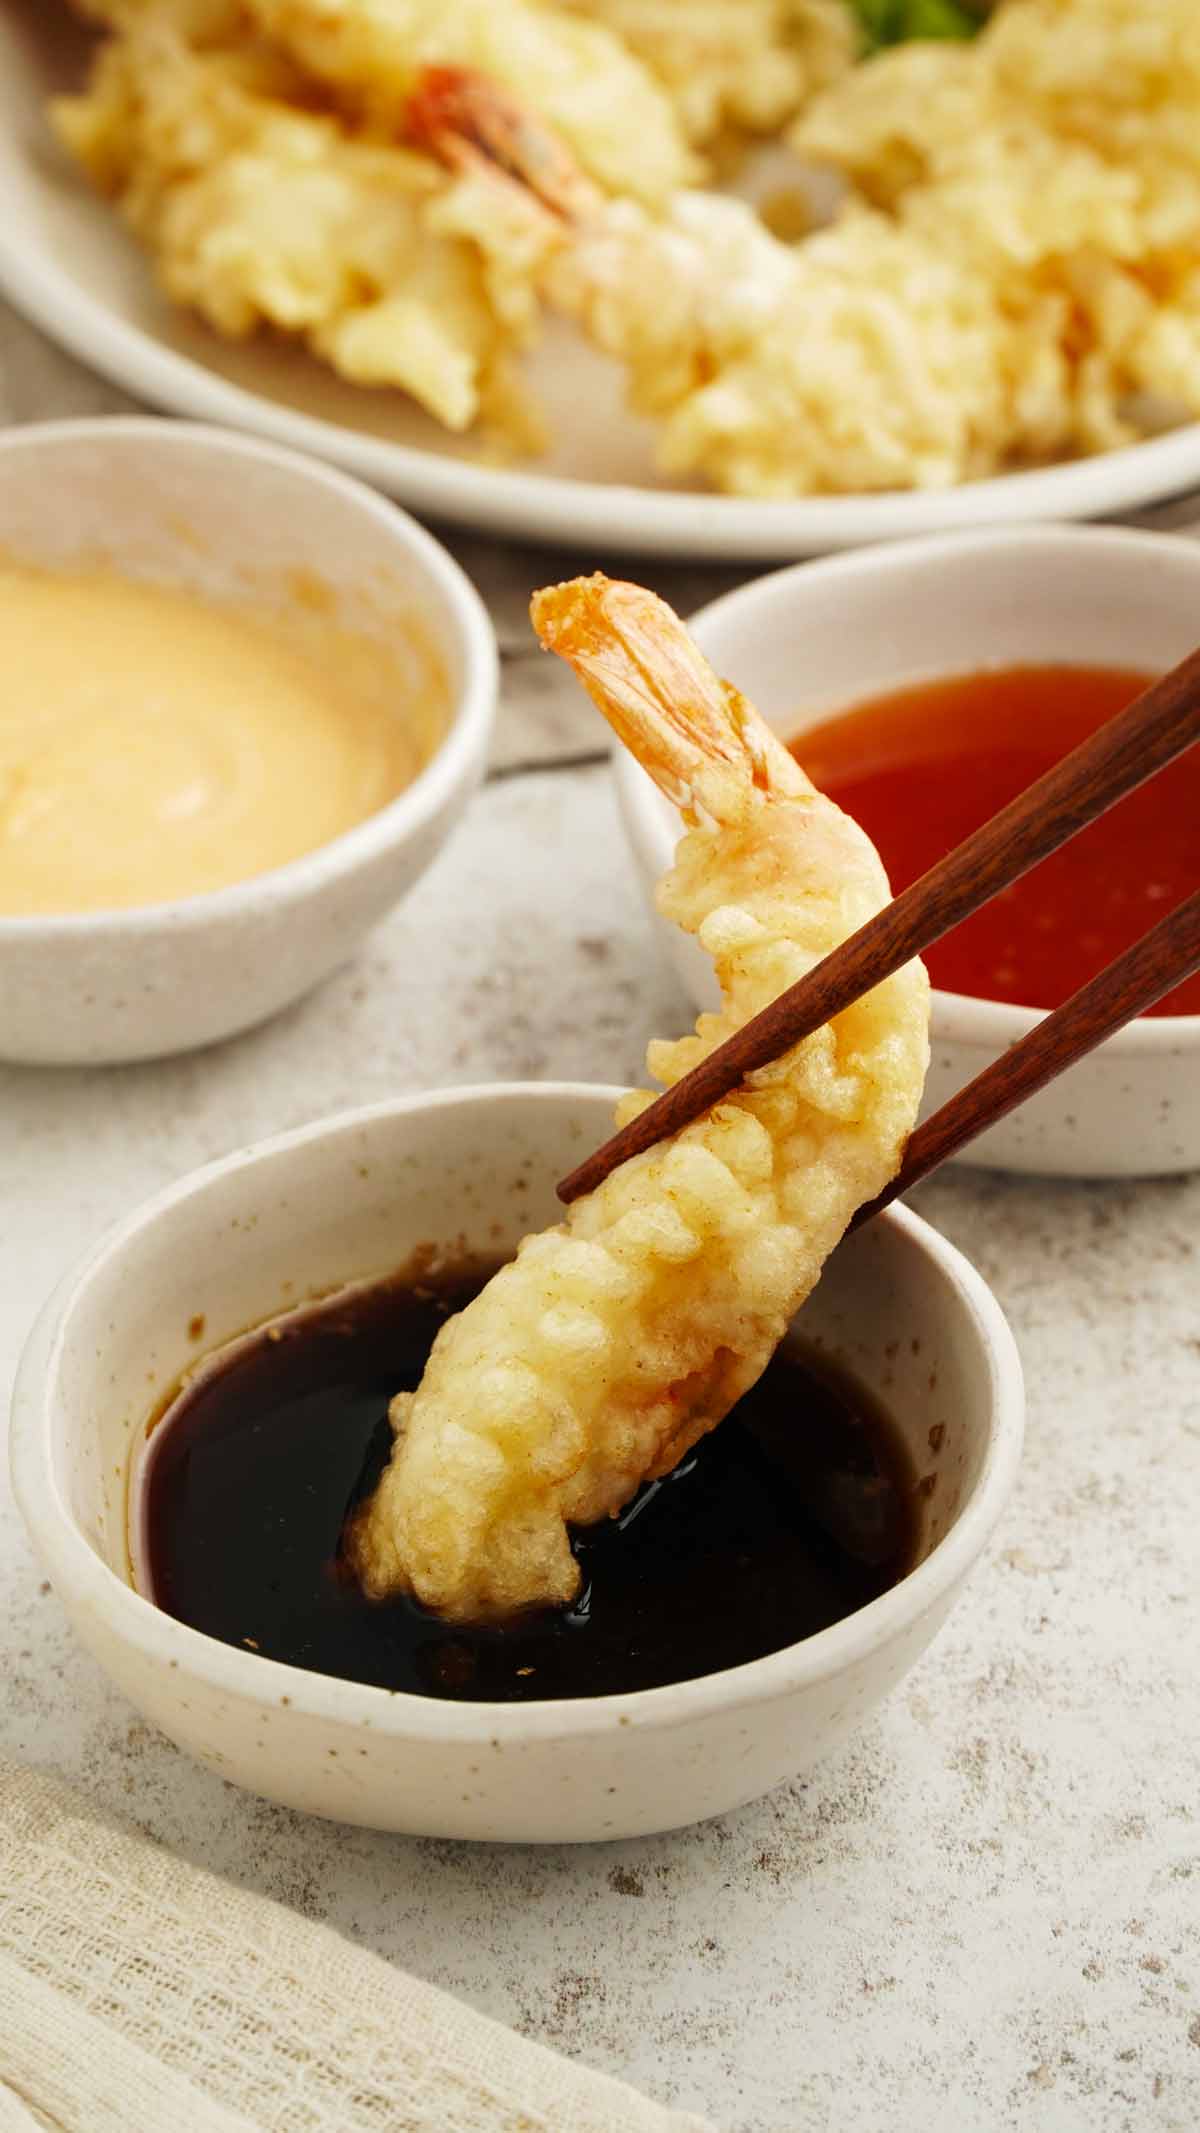 A pair of chopstick holding a fried prawns, dipped in a soy dipping sauce.